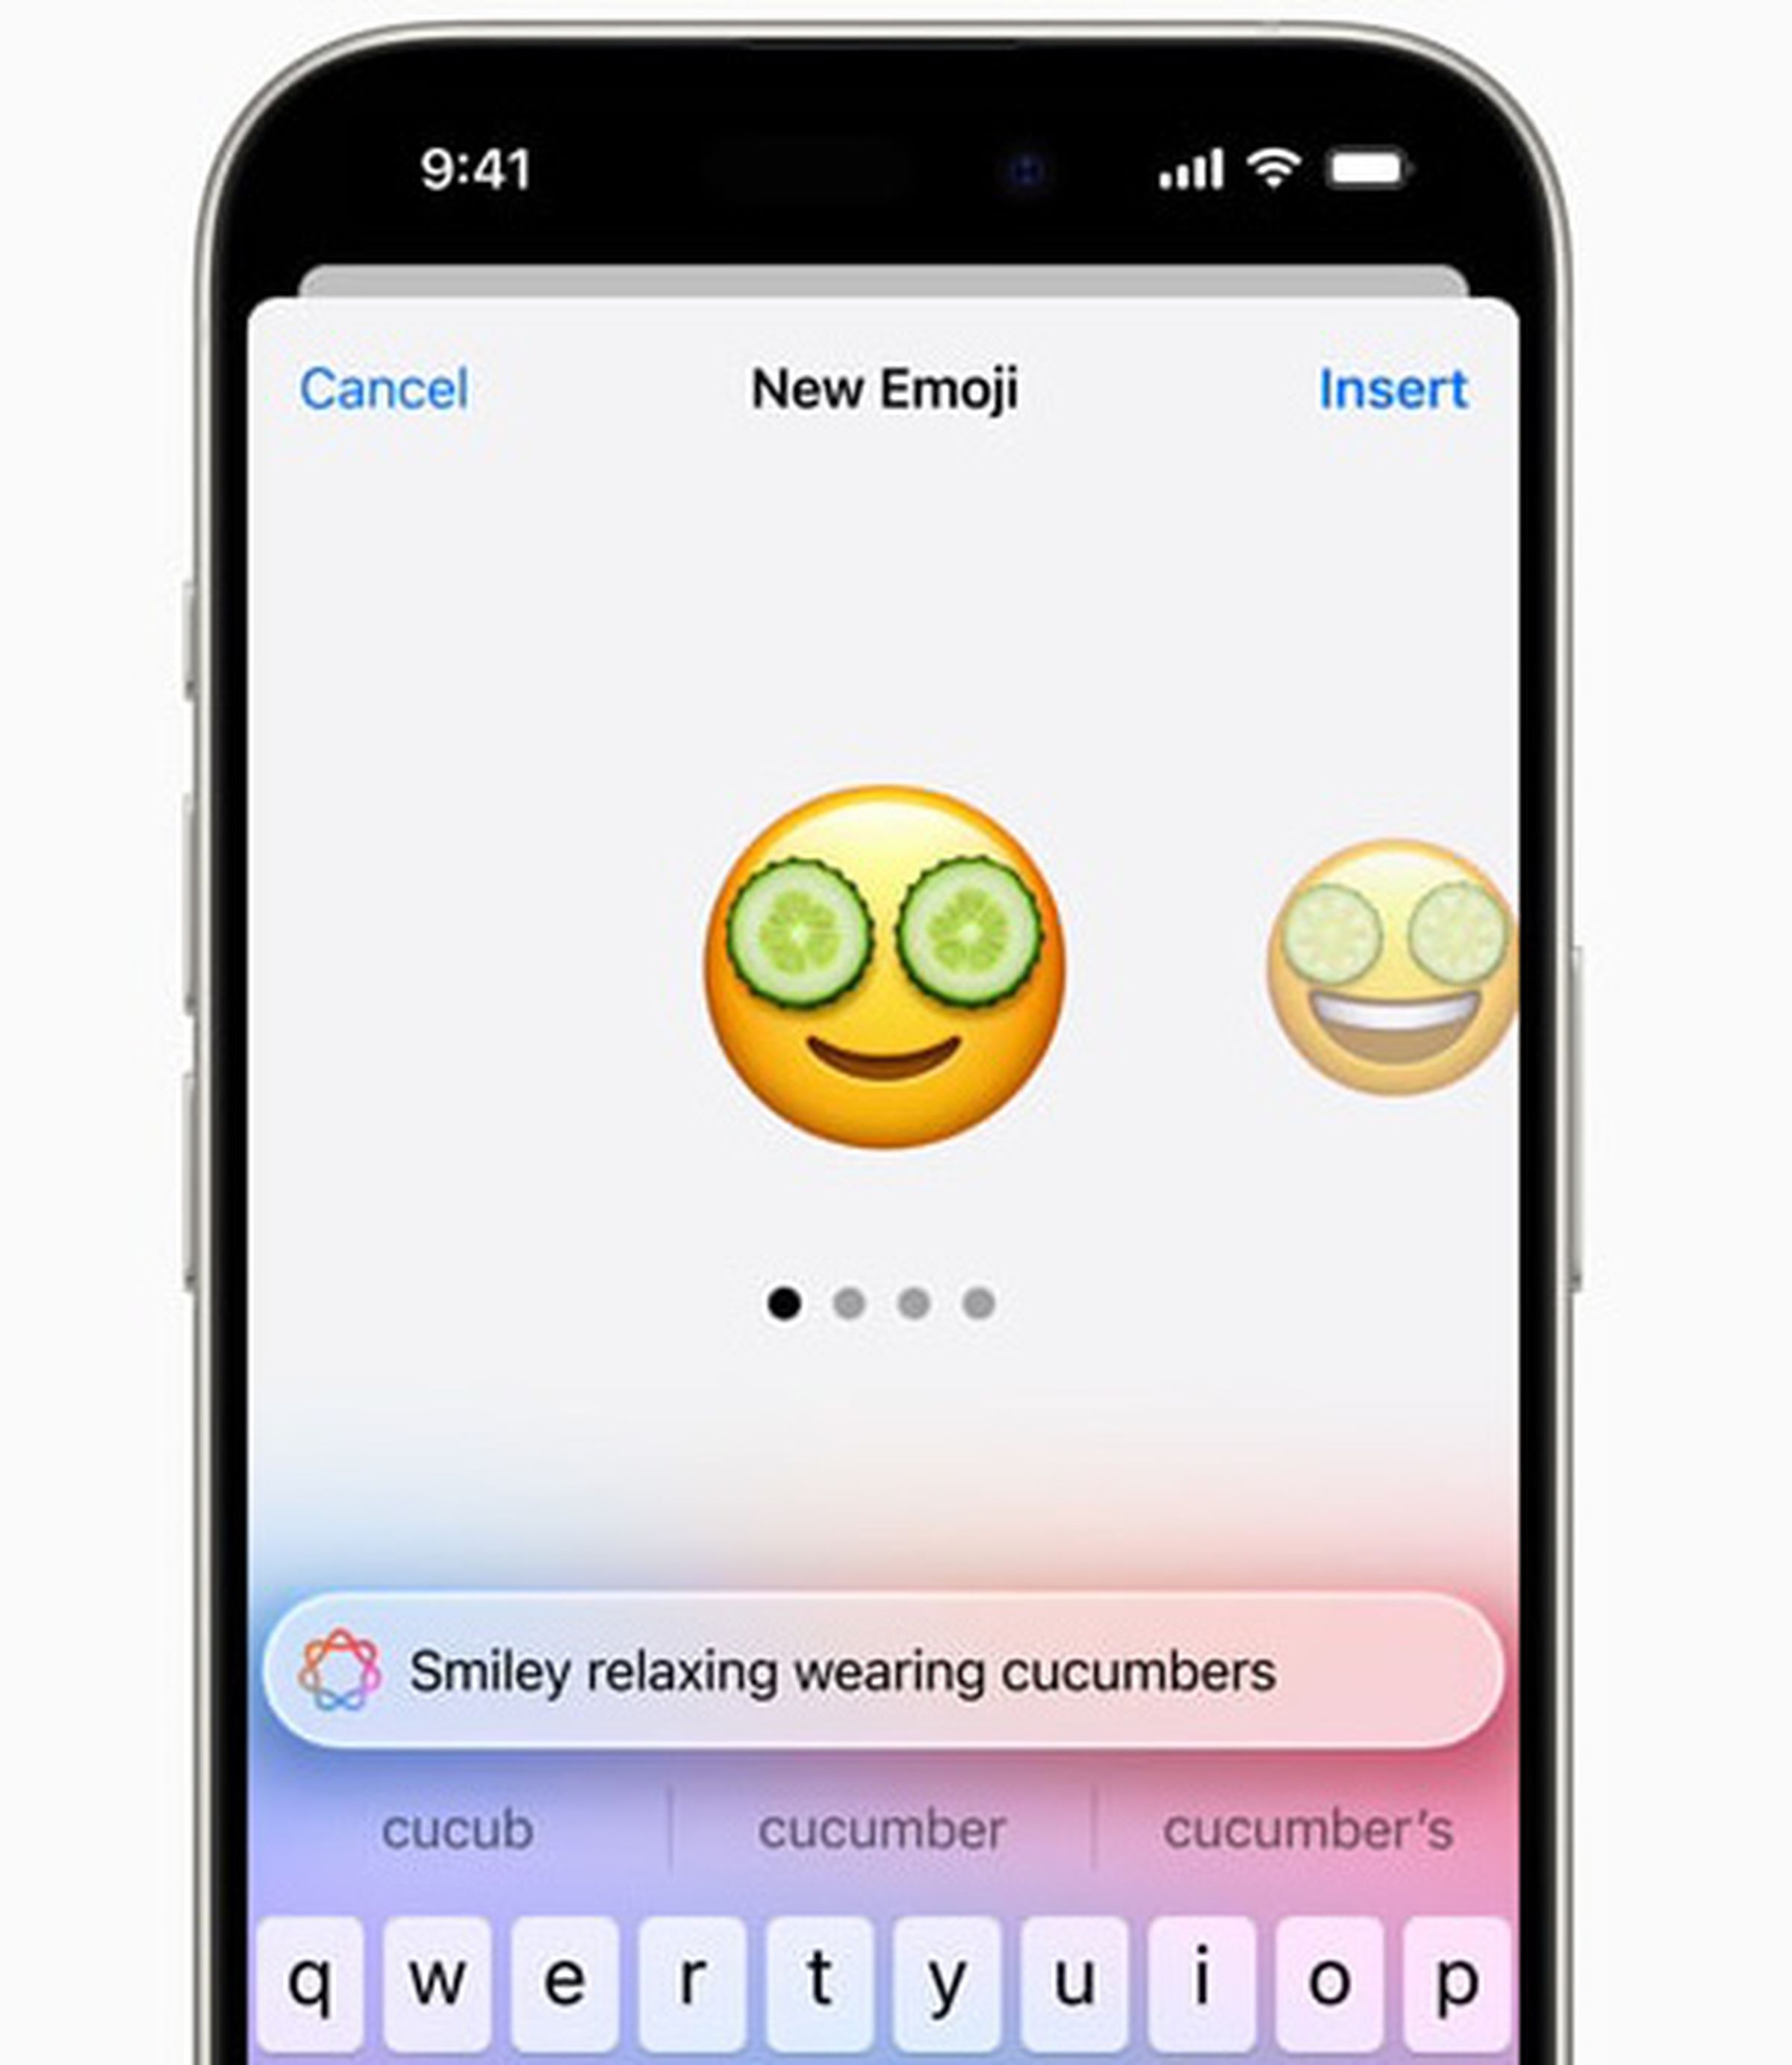 Picture of an iPhone with a genmoji smiley wearing cucumber slices on its eyes.